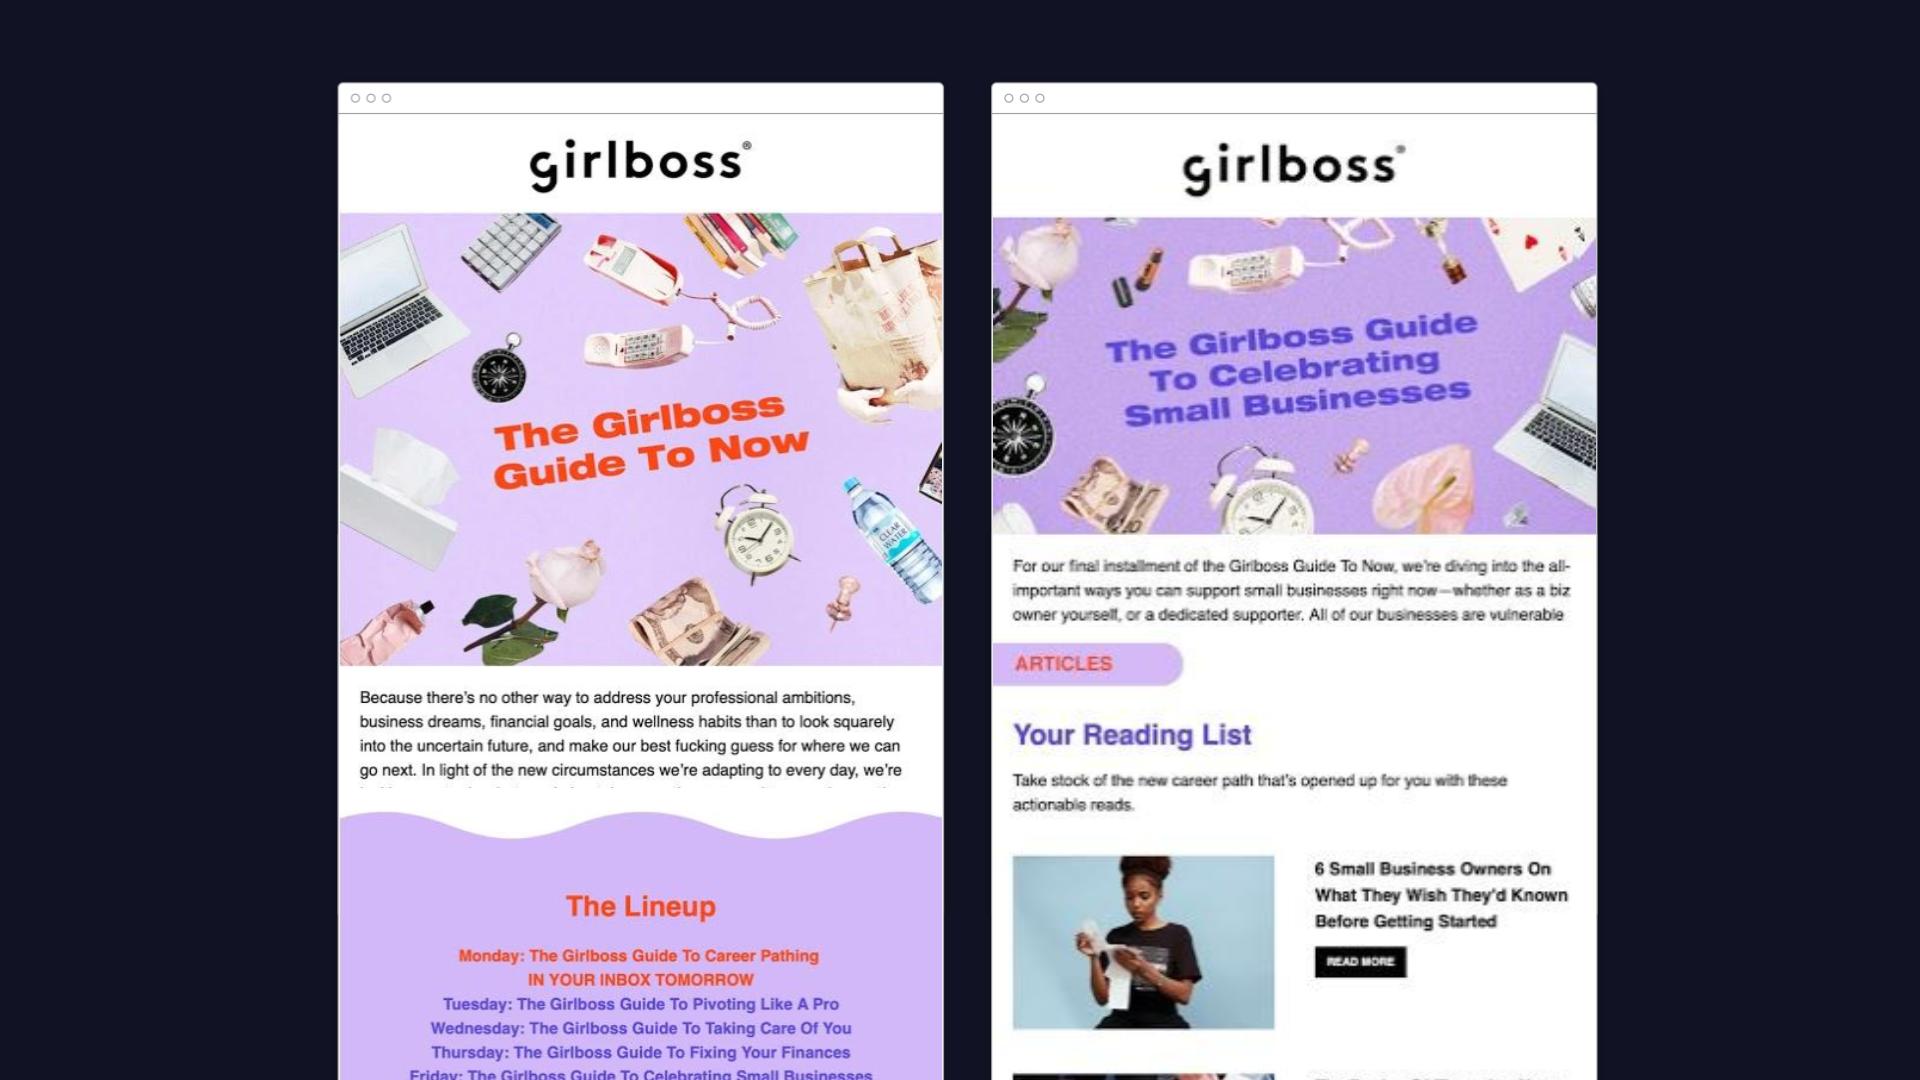 newsletter examples from Girlboss during the 2020 pandemic